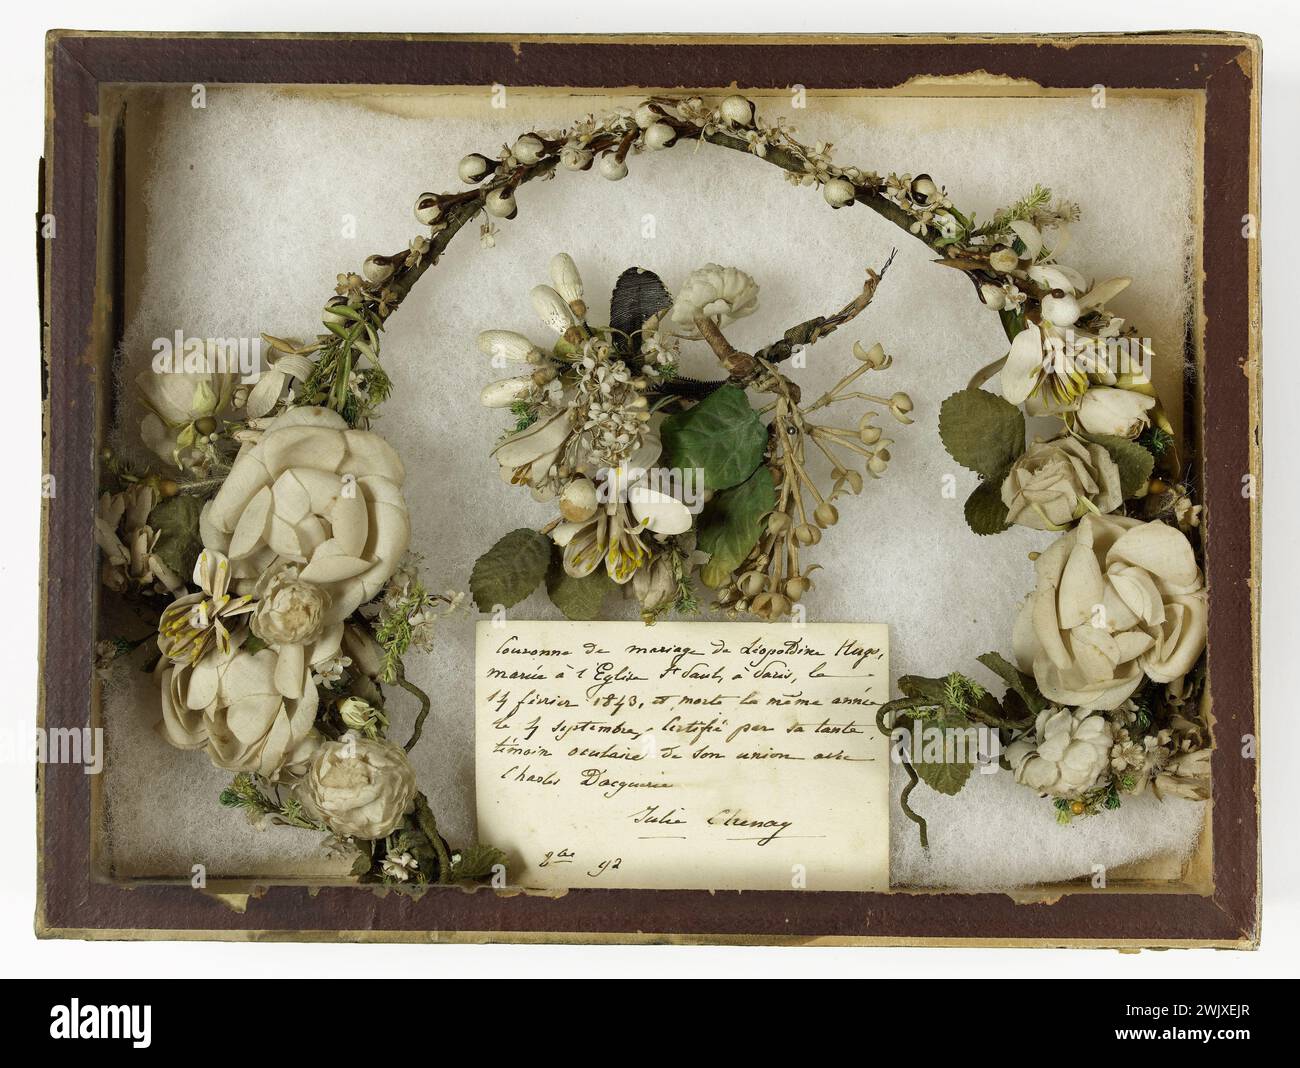 Anonymous. 'Léopoldine Hugo's bridal crown'. Fabric with imitation of white flowers and leaves on frame, in a cardboard and glass box. 1843. Paris, house of Victor Hugo. Hauteville House. 74552-1 White, crown, artificial flower, wedding, married, purete, union Stock Photo